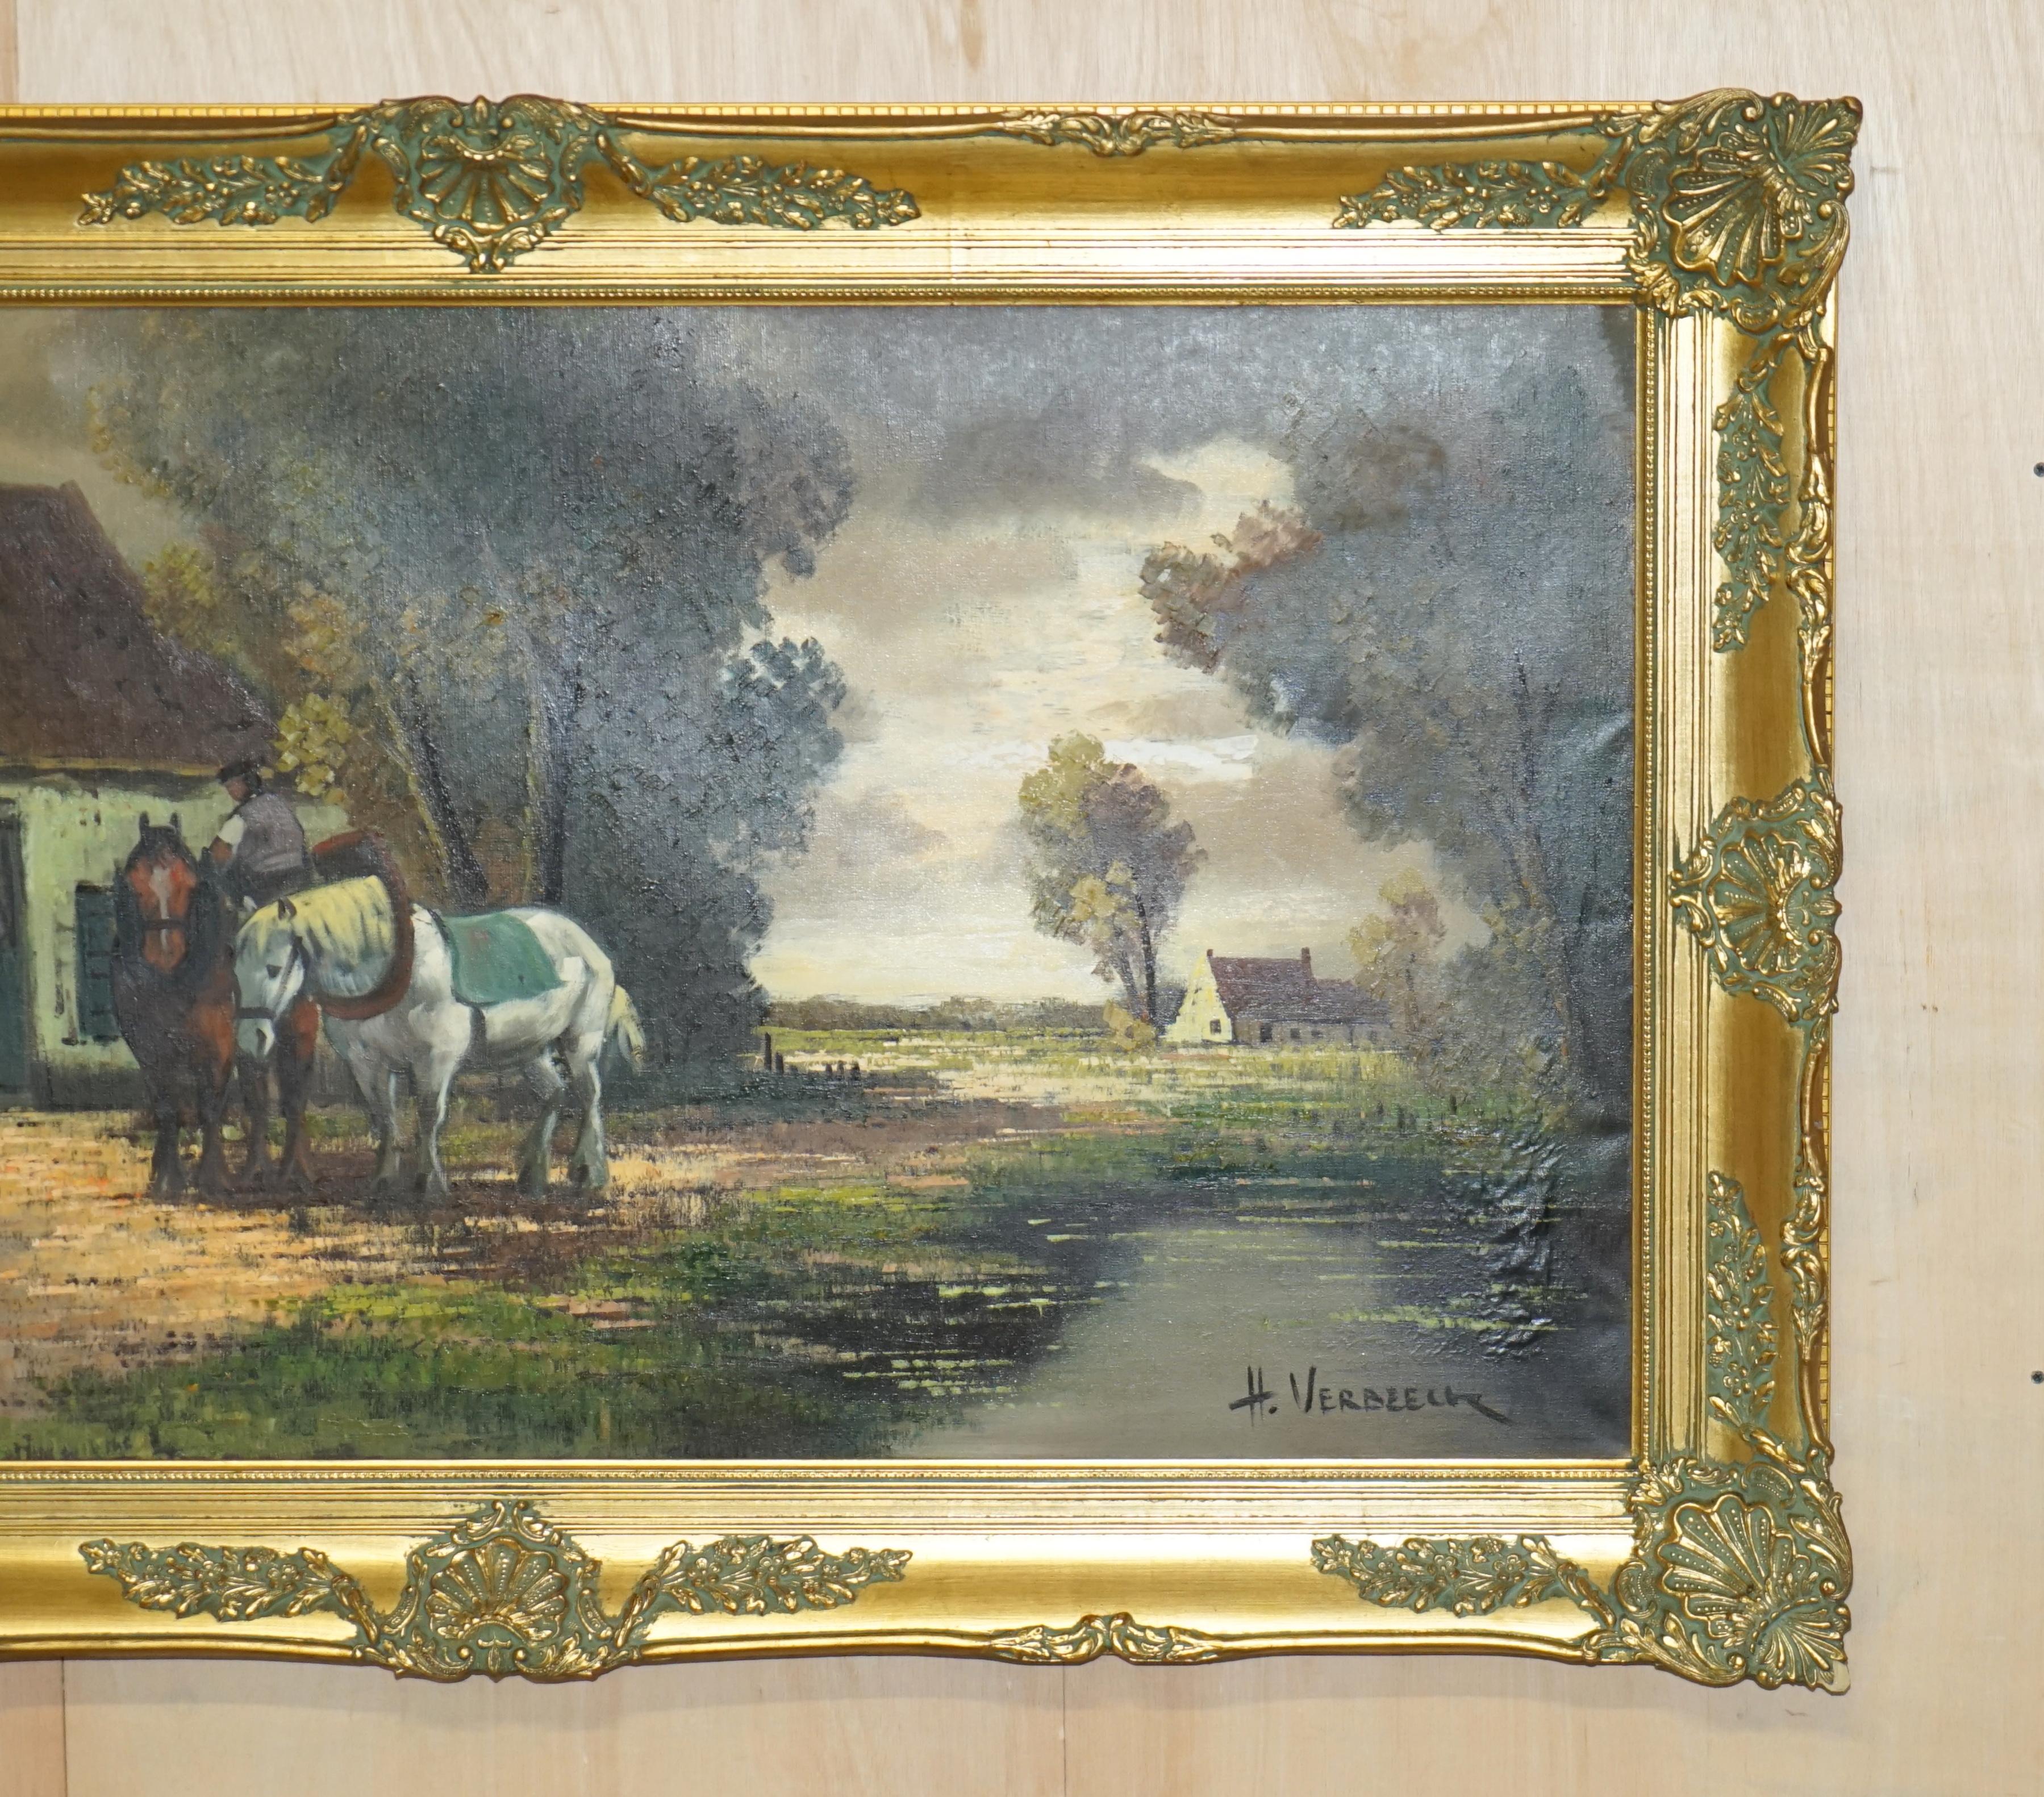 Canvas EXTRA LARGE 159X94CM H. VERBEELK SiGNED OIL PAINTING OF A RURAL SCENE WITH HORSE For Sale